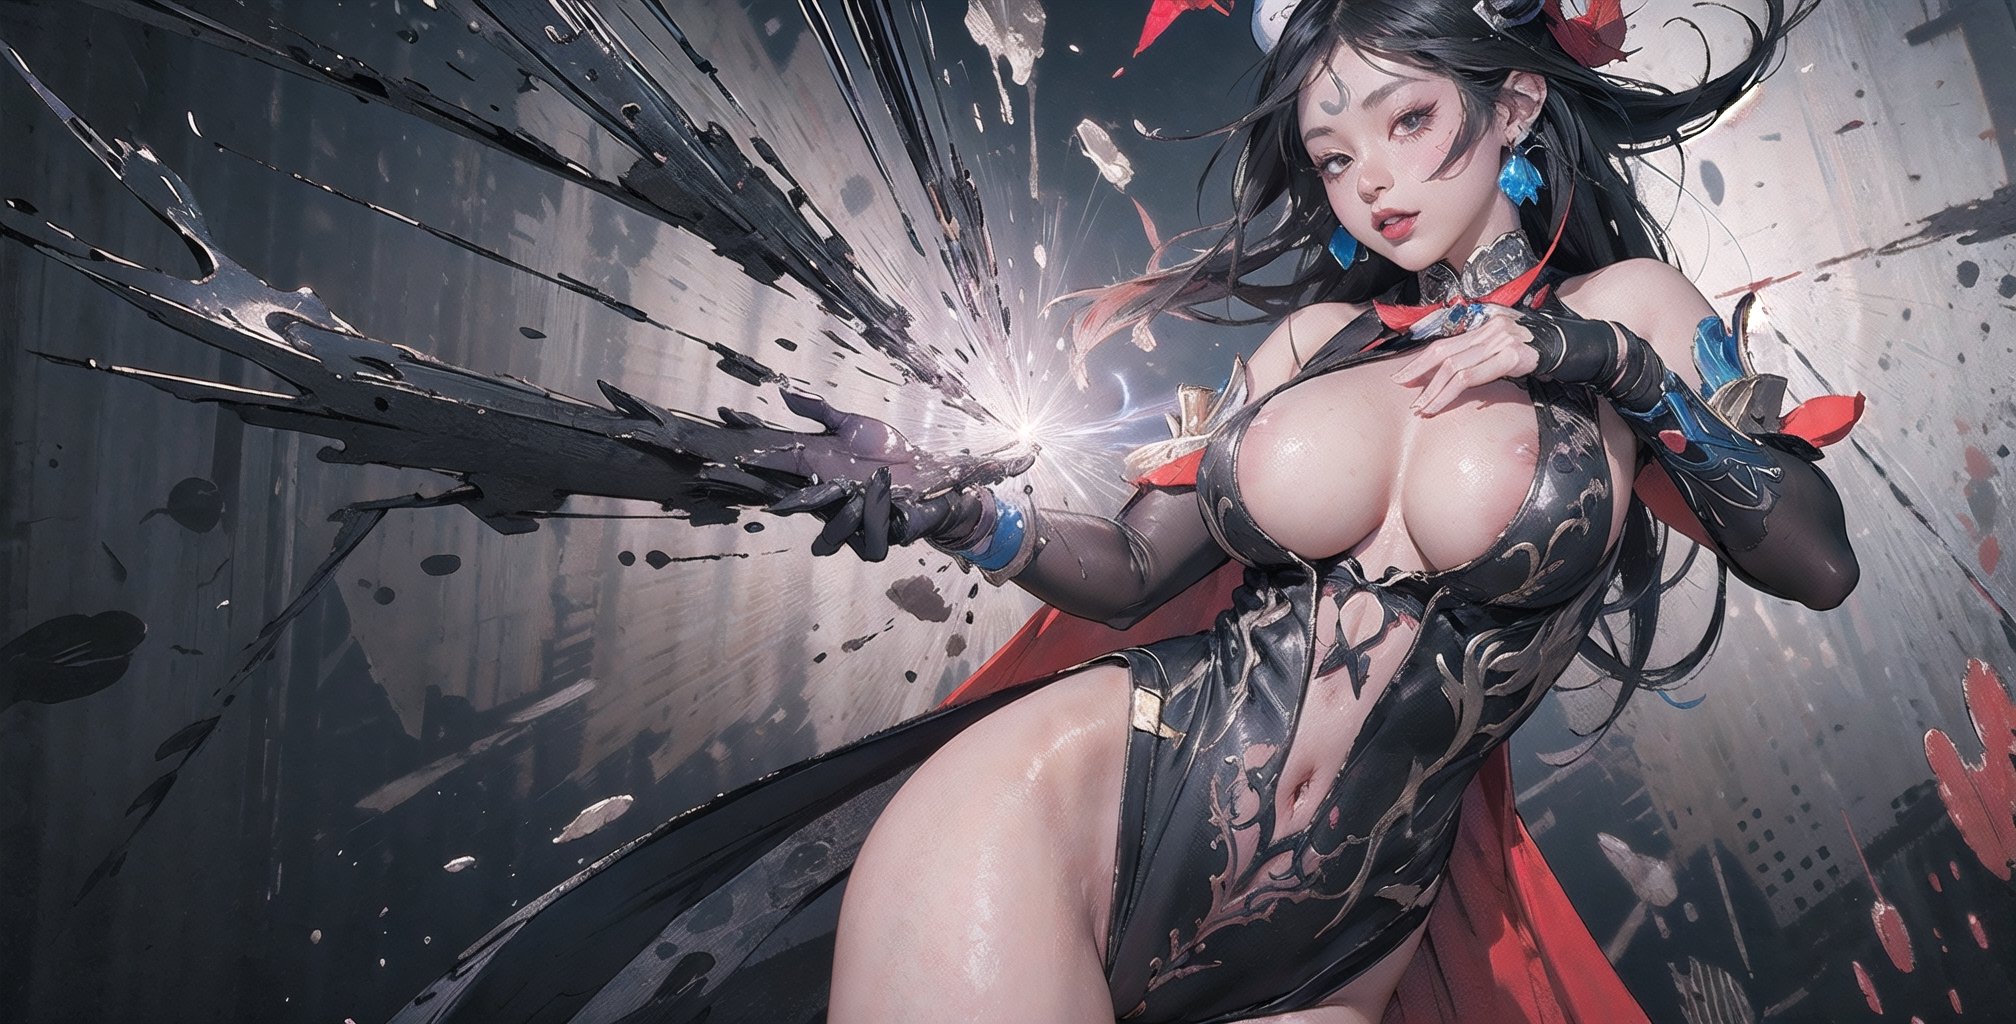 arlecchino(genshin impact), Abstrack background splash art, huge breasts, realistic photography, red black ombre hair, sm4c3w3k, pussy, open_pussy